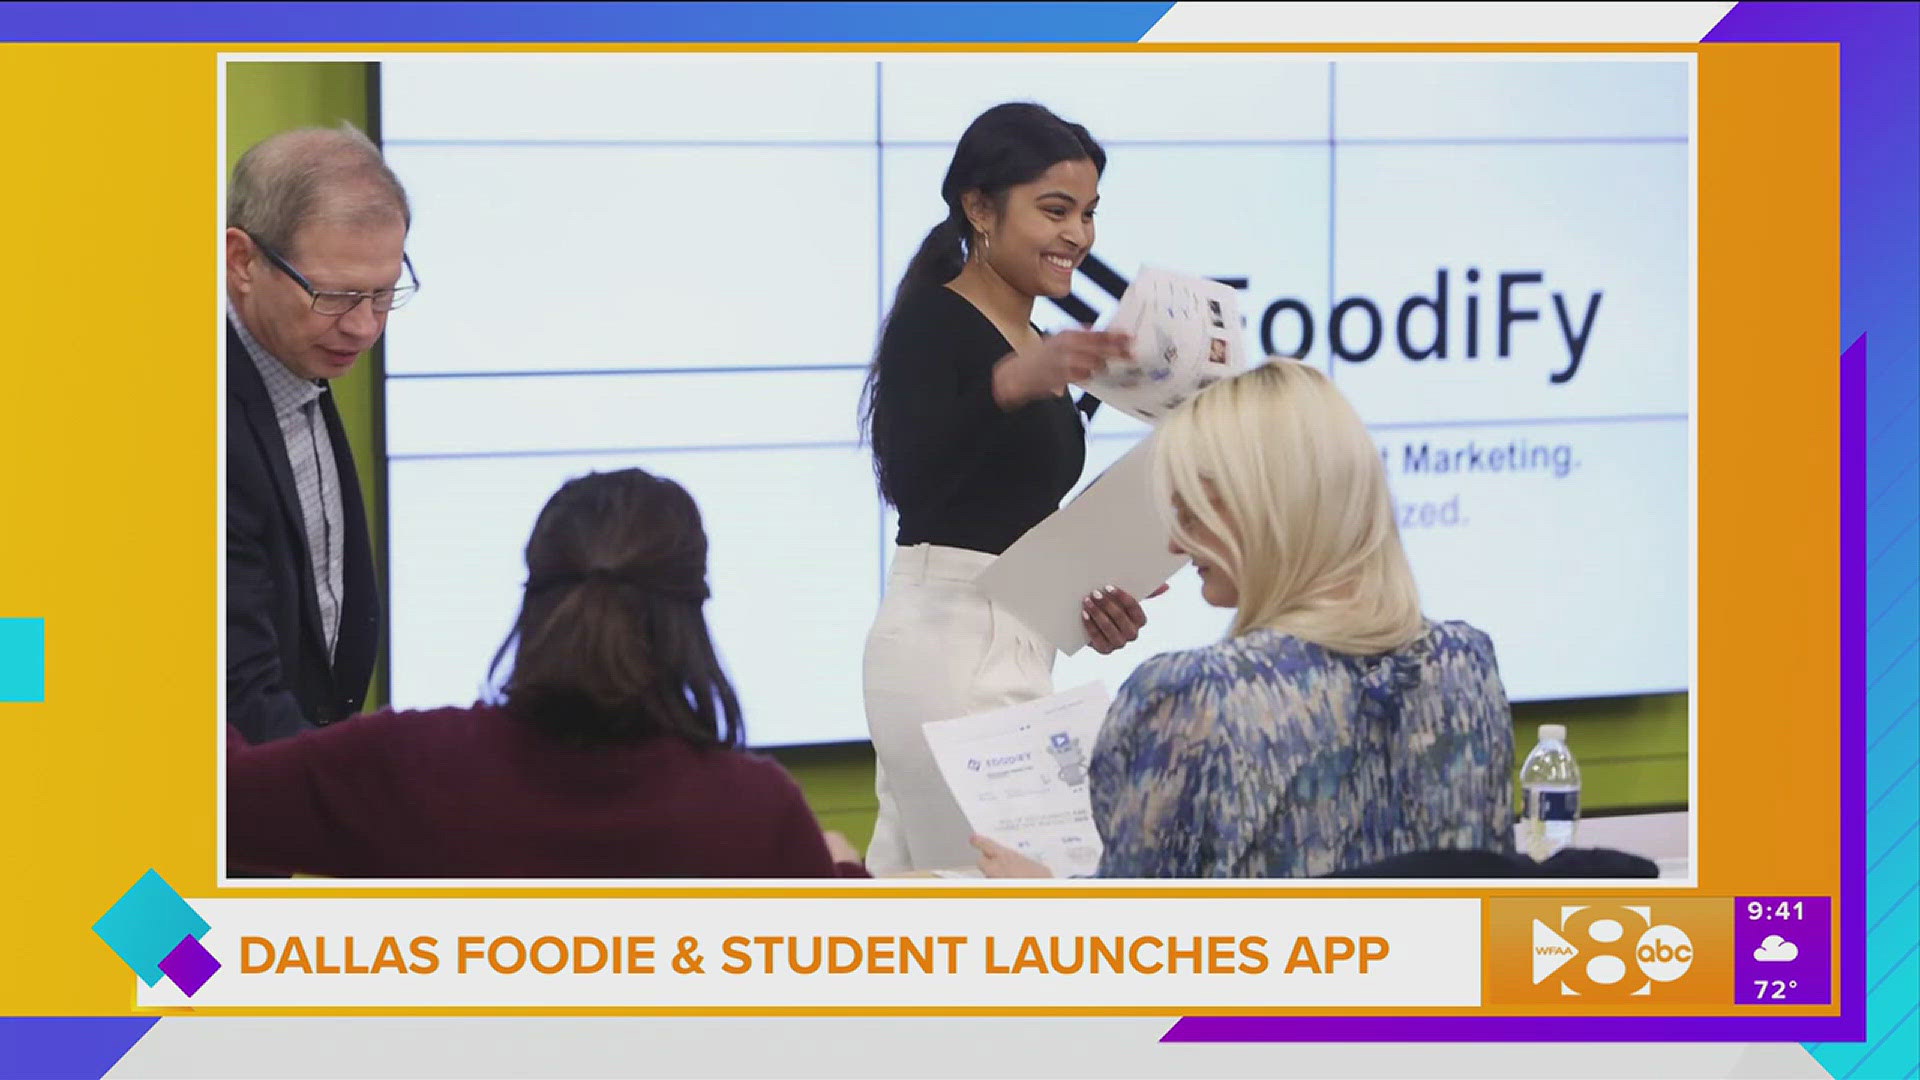 Anisha Holla describes her new app that connects restaurant owners with local food influencers